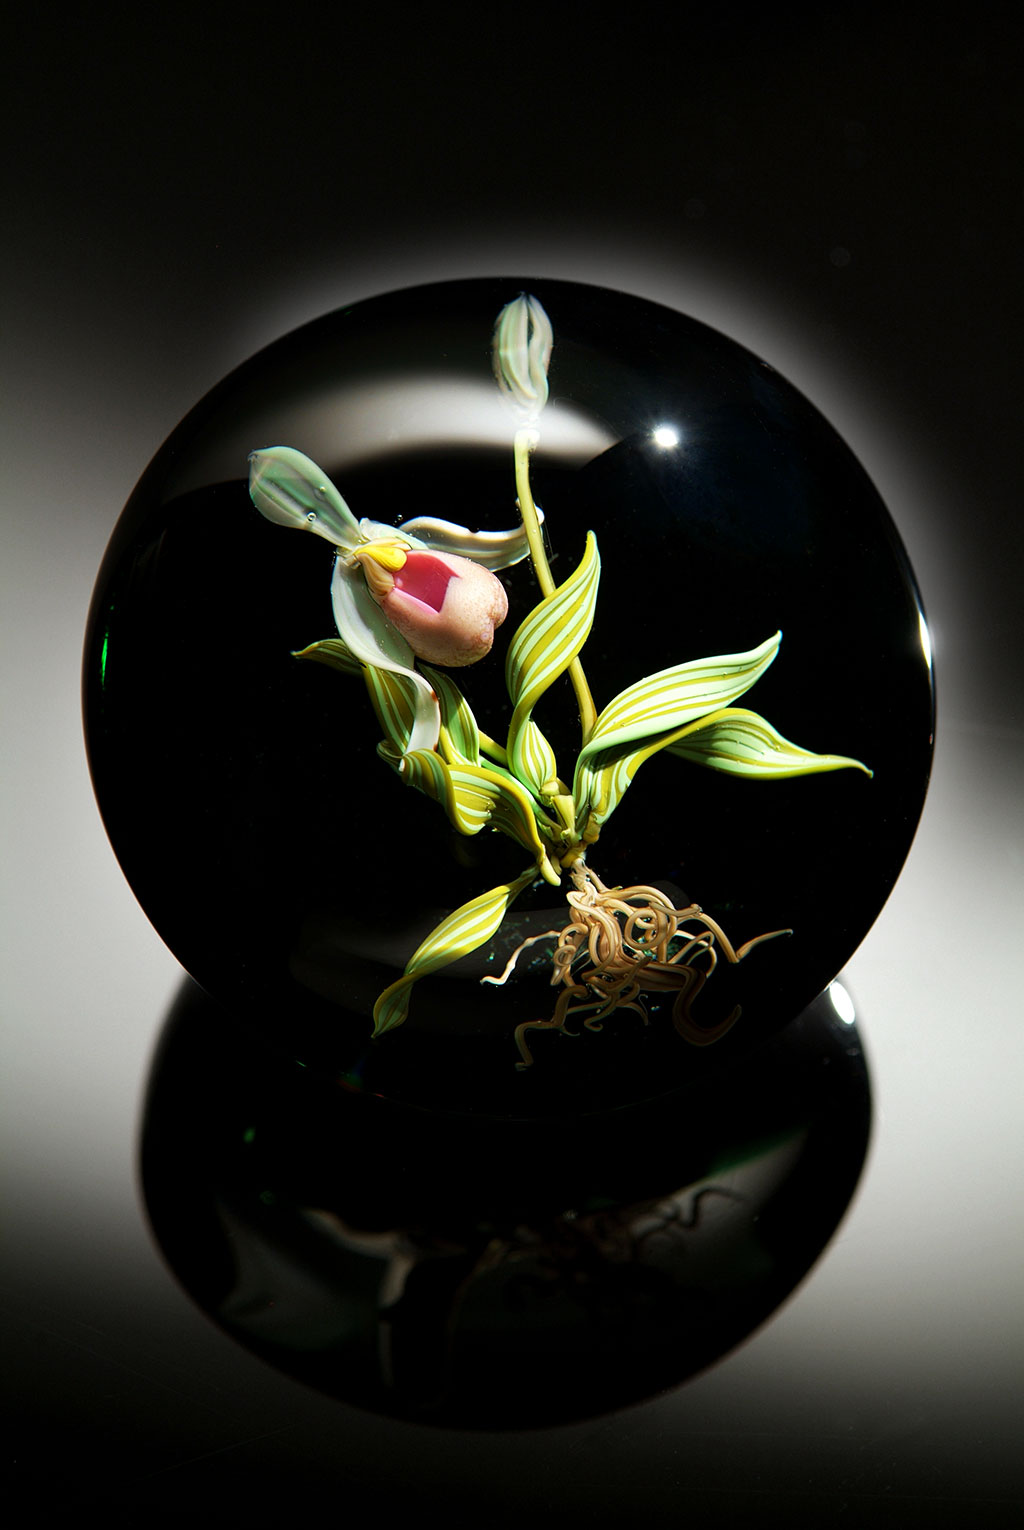 Katherine Stankard Campbell, Paphiopedilum Orchid Paperweight, 2008. Douglas Schaible photograph